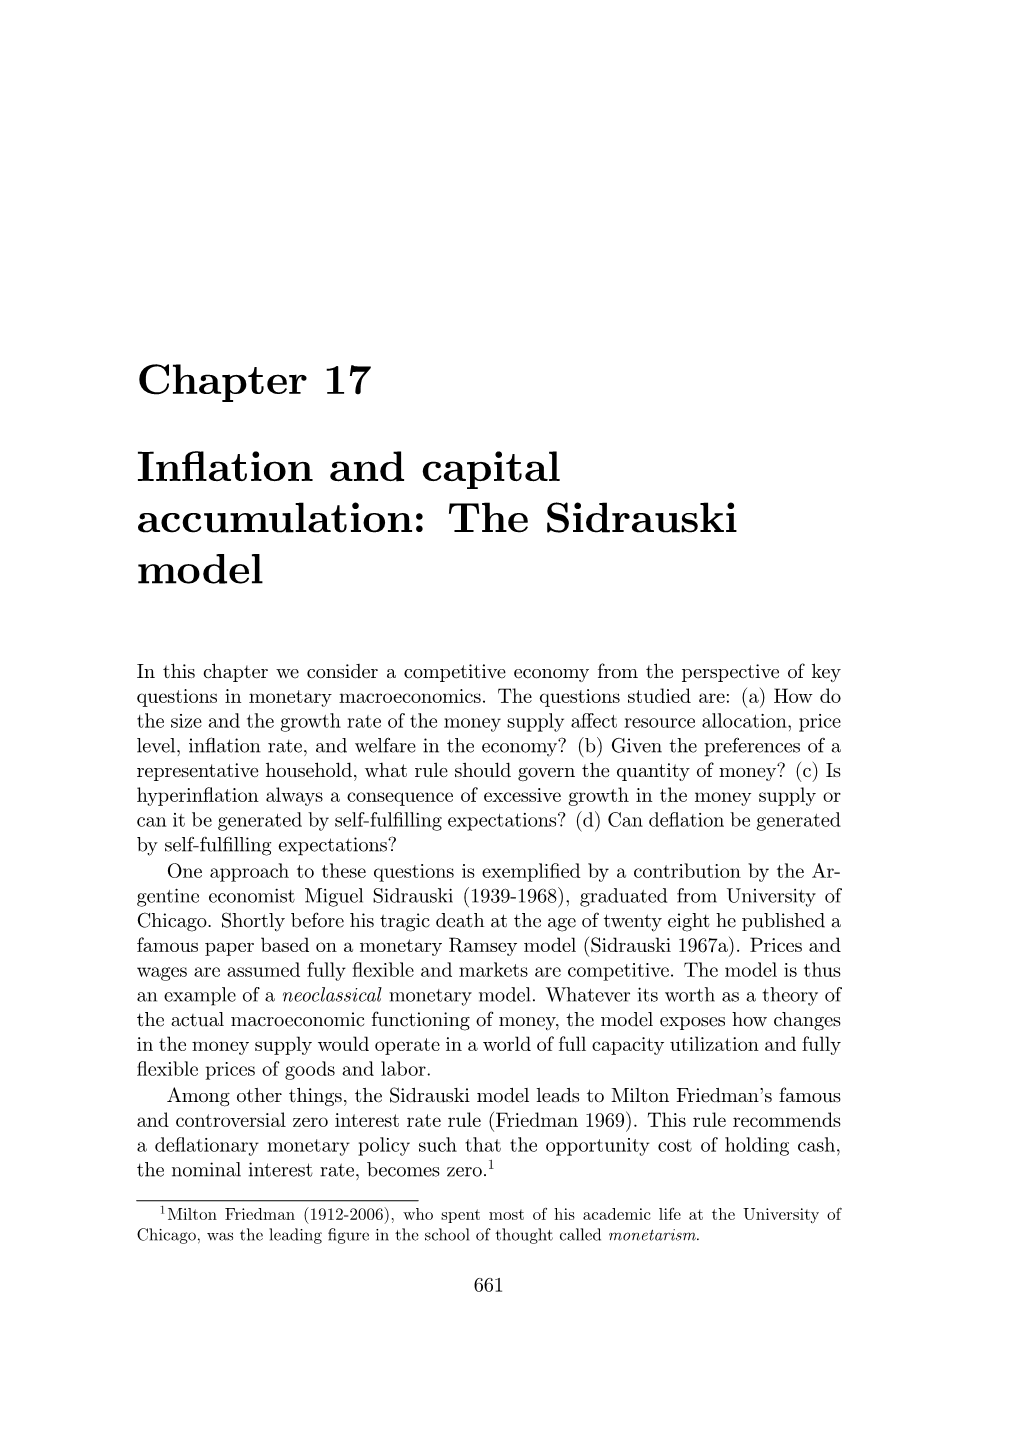 Chapter 17 Inflation and Capital Accumulation: the Sidrauski Model